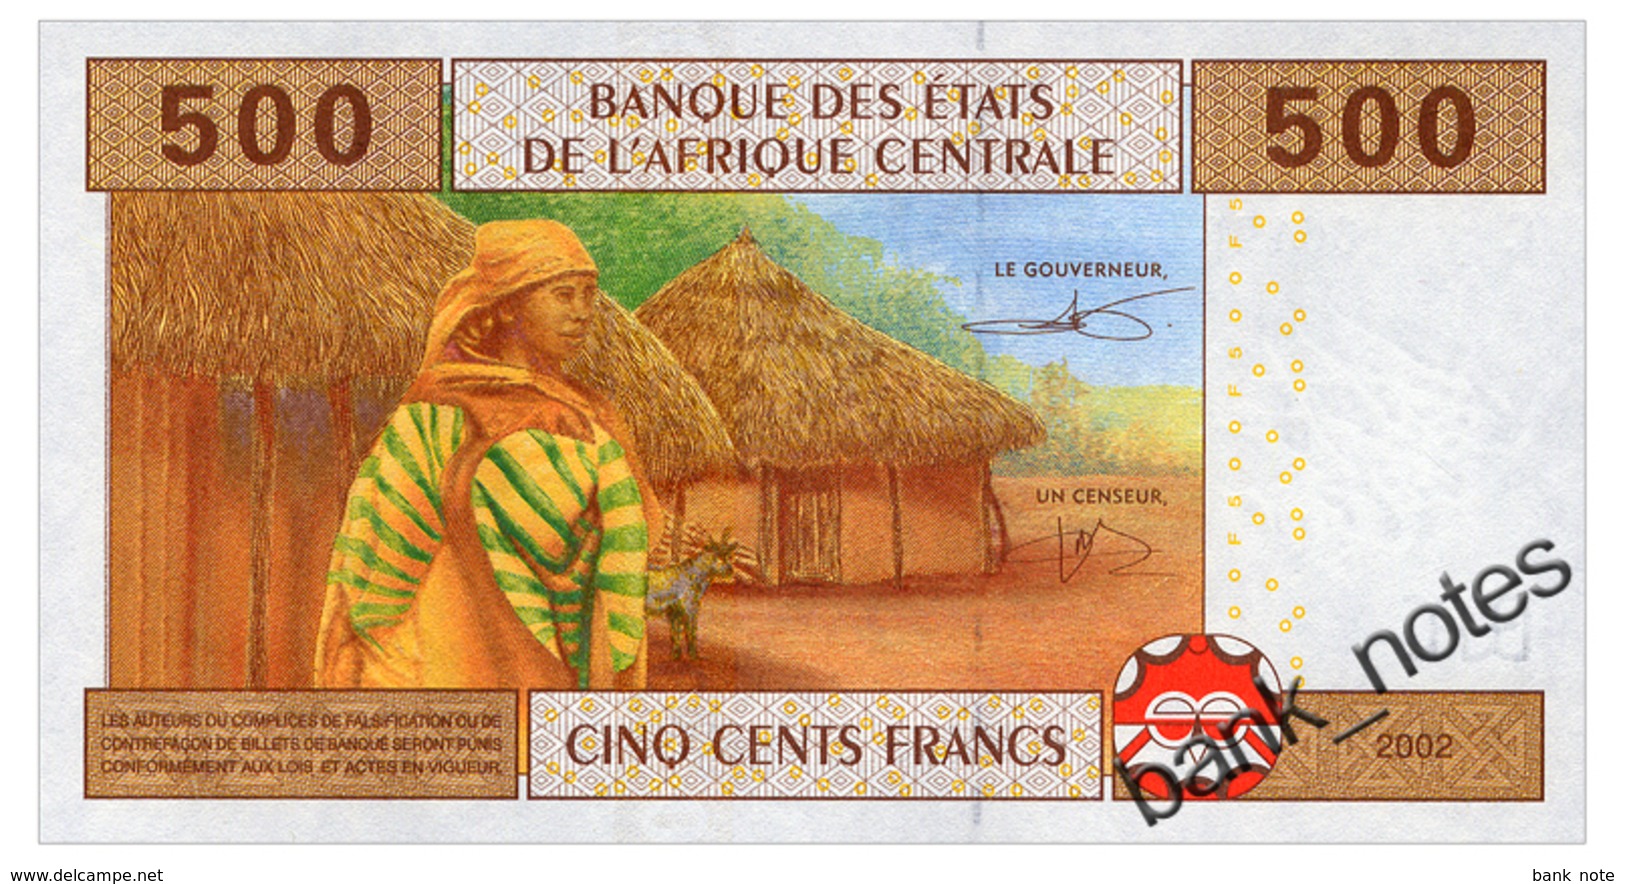 CENTRAL AFRICAN STATES 500 FRANCS 2016 CHAD ABAGA-NCHAMA - LOUIS ALEKA-RYBERT Pick 606Cc Unc - Zentralafrikanische Staaten